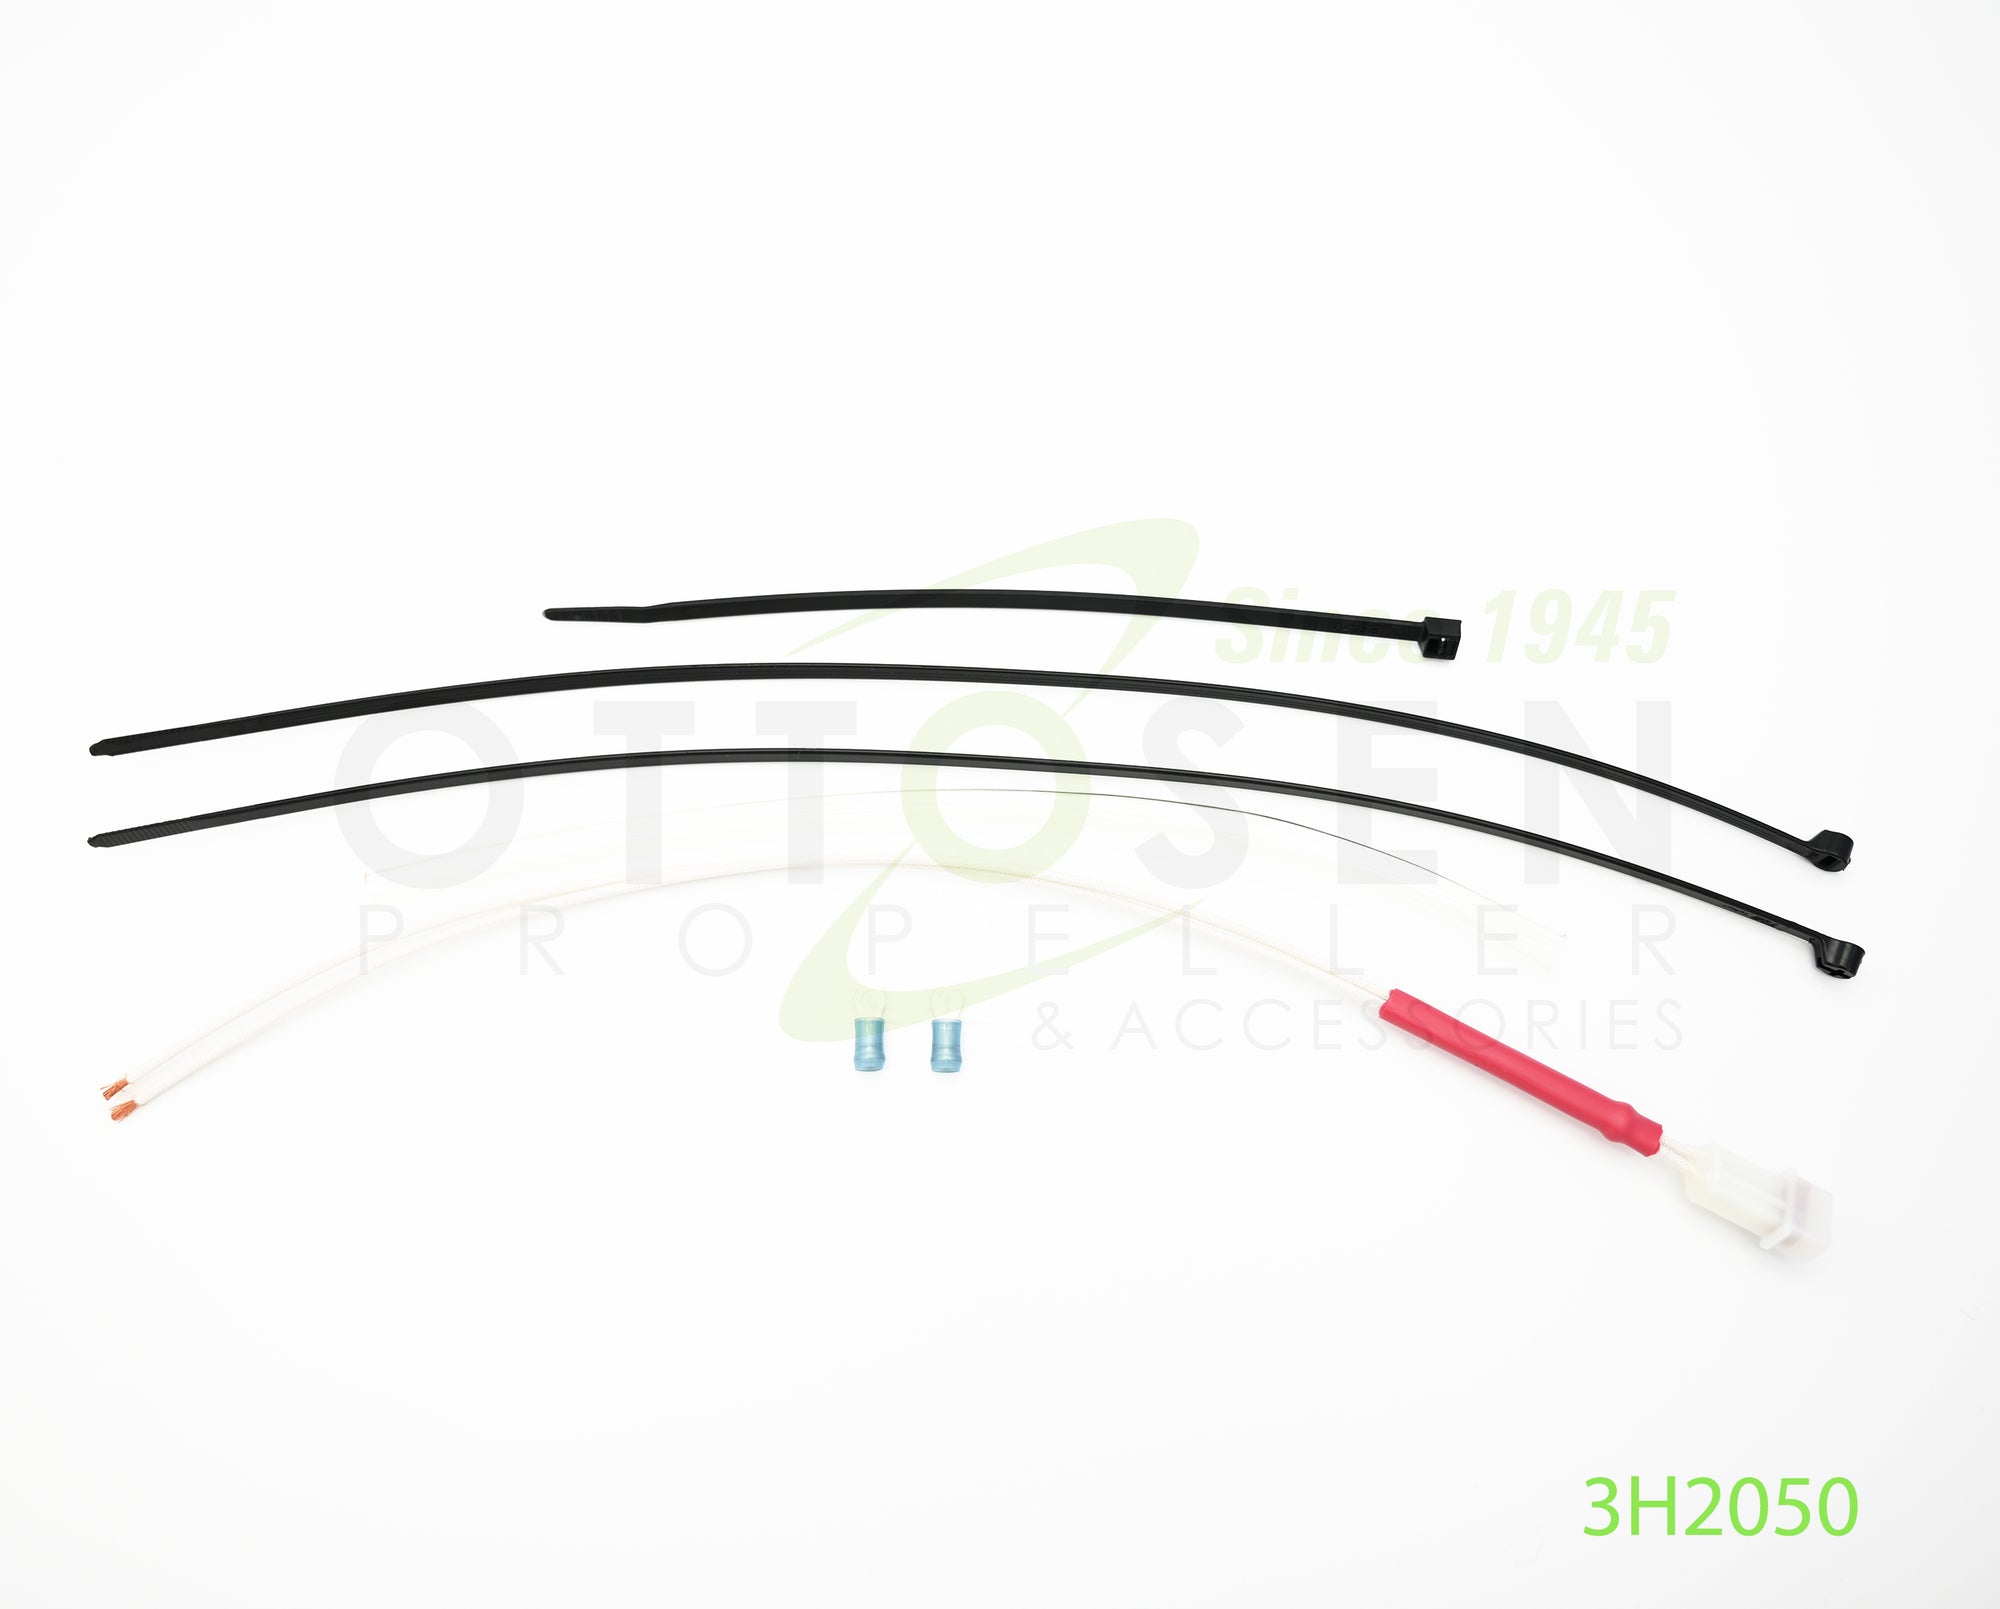 3H2050-HARTZELL-PROPELLER-WIRE-HARNESS-KIT-PICTURE-1